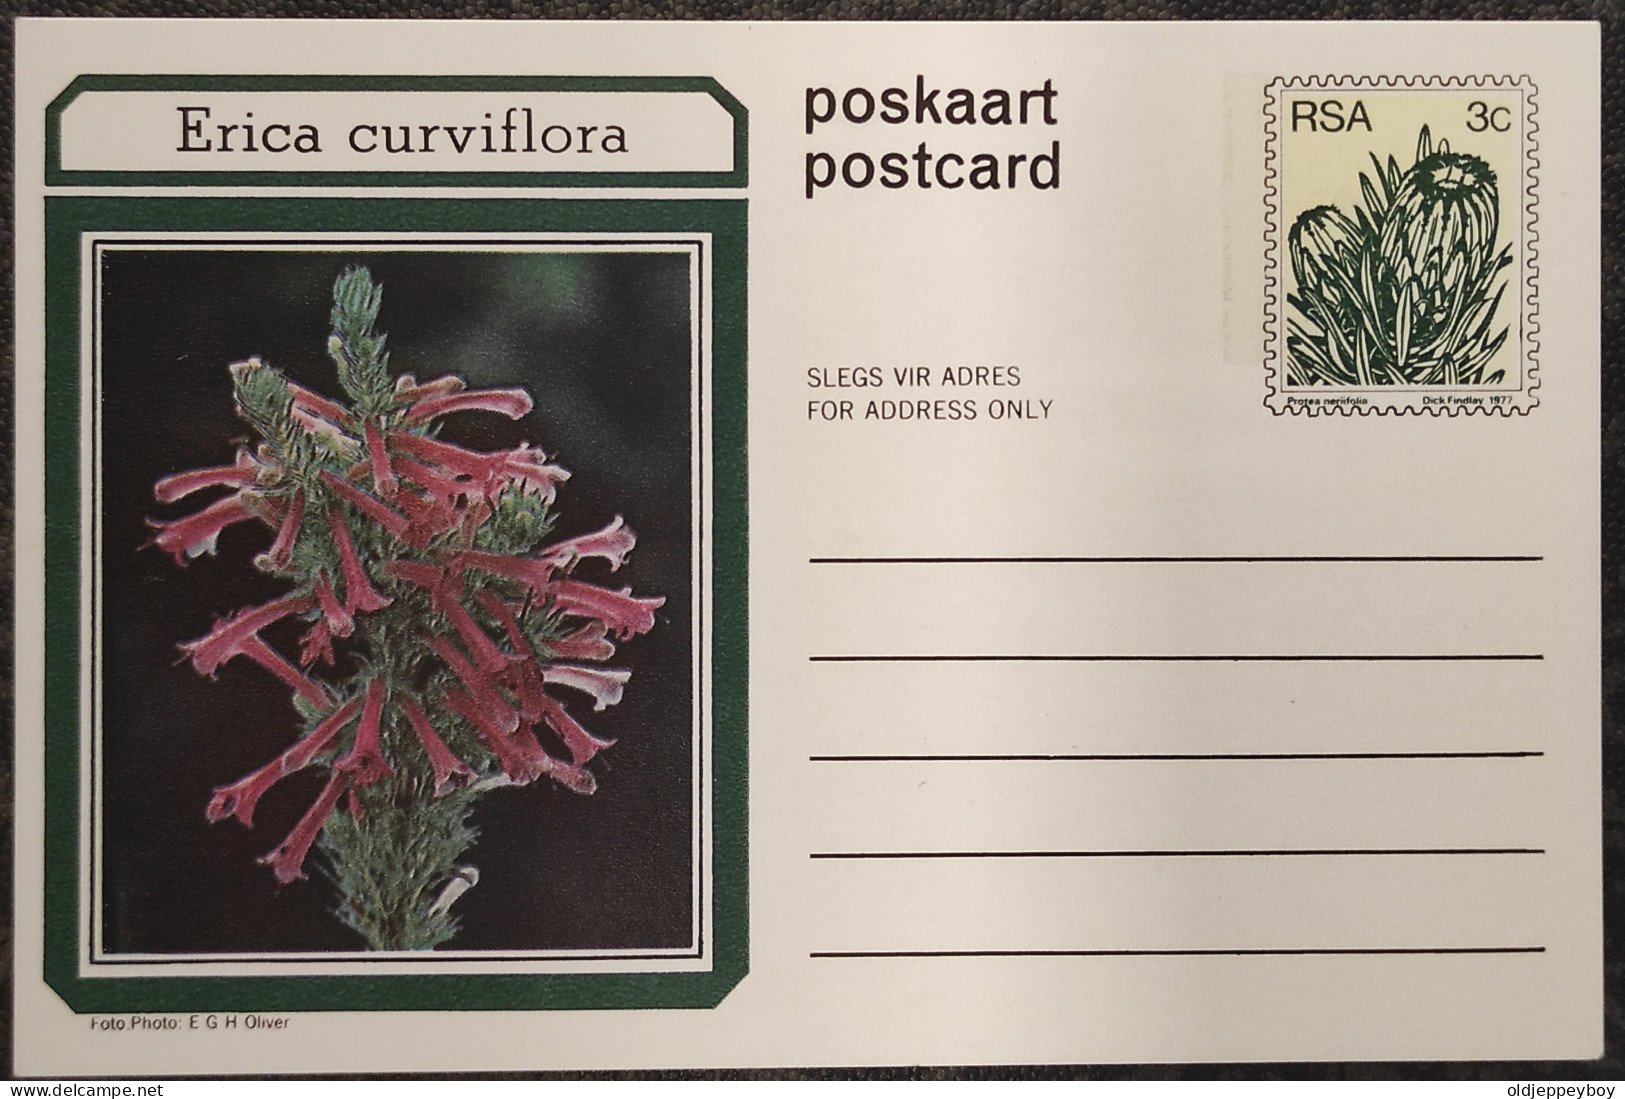 3c SOUTH AFRICA Postal STATIONERY CARD Illus ERICA CURVIFLORA FLOWER Cover Stamps Flowers Rsa - Cartas & Documentos